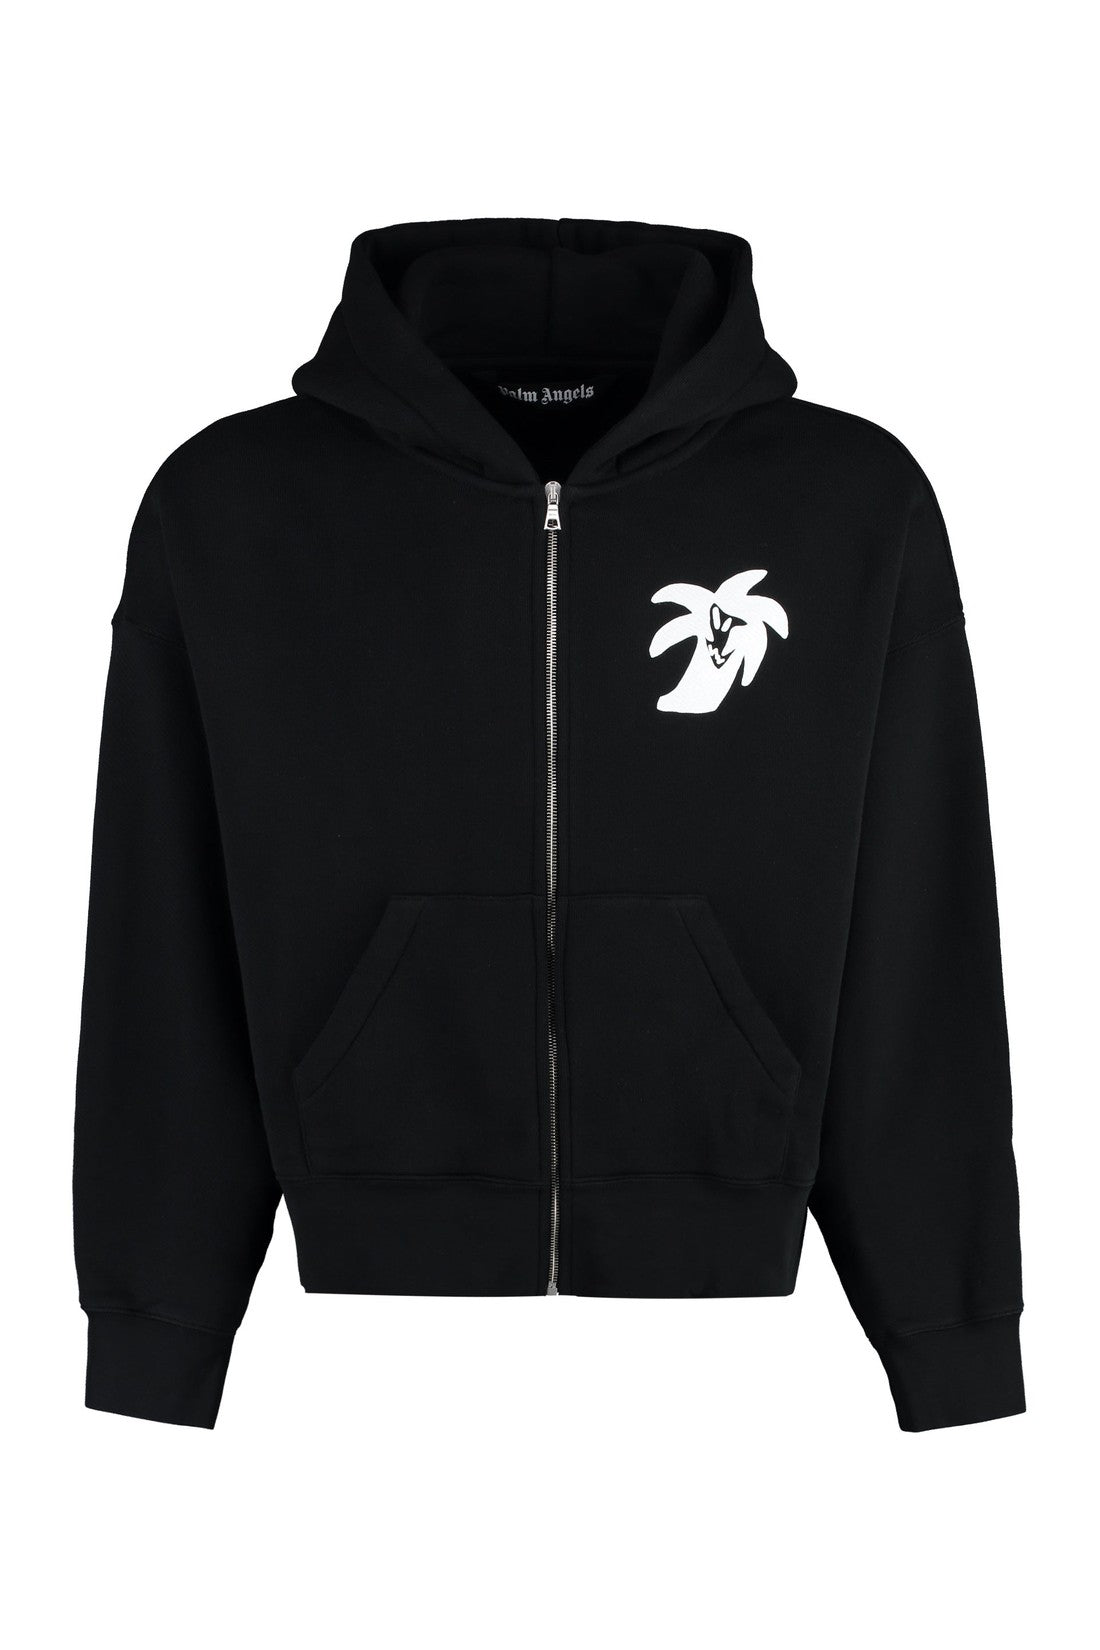 Palm Angels-OUTLET-SALE-Full zip hoodie-ARCHIVIST